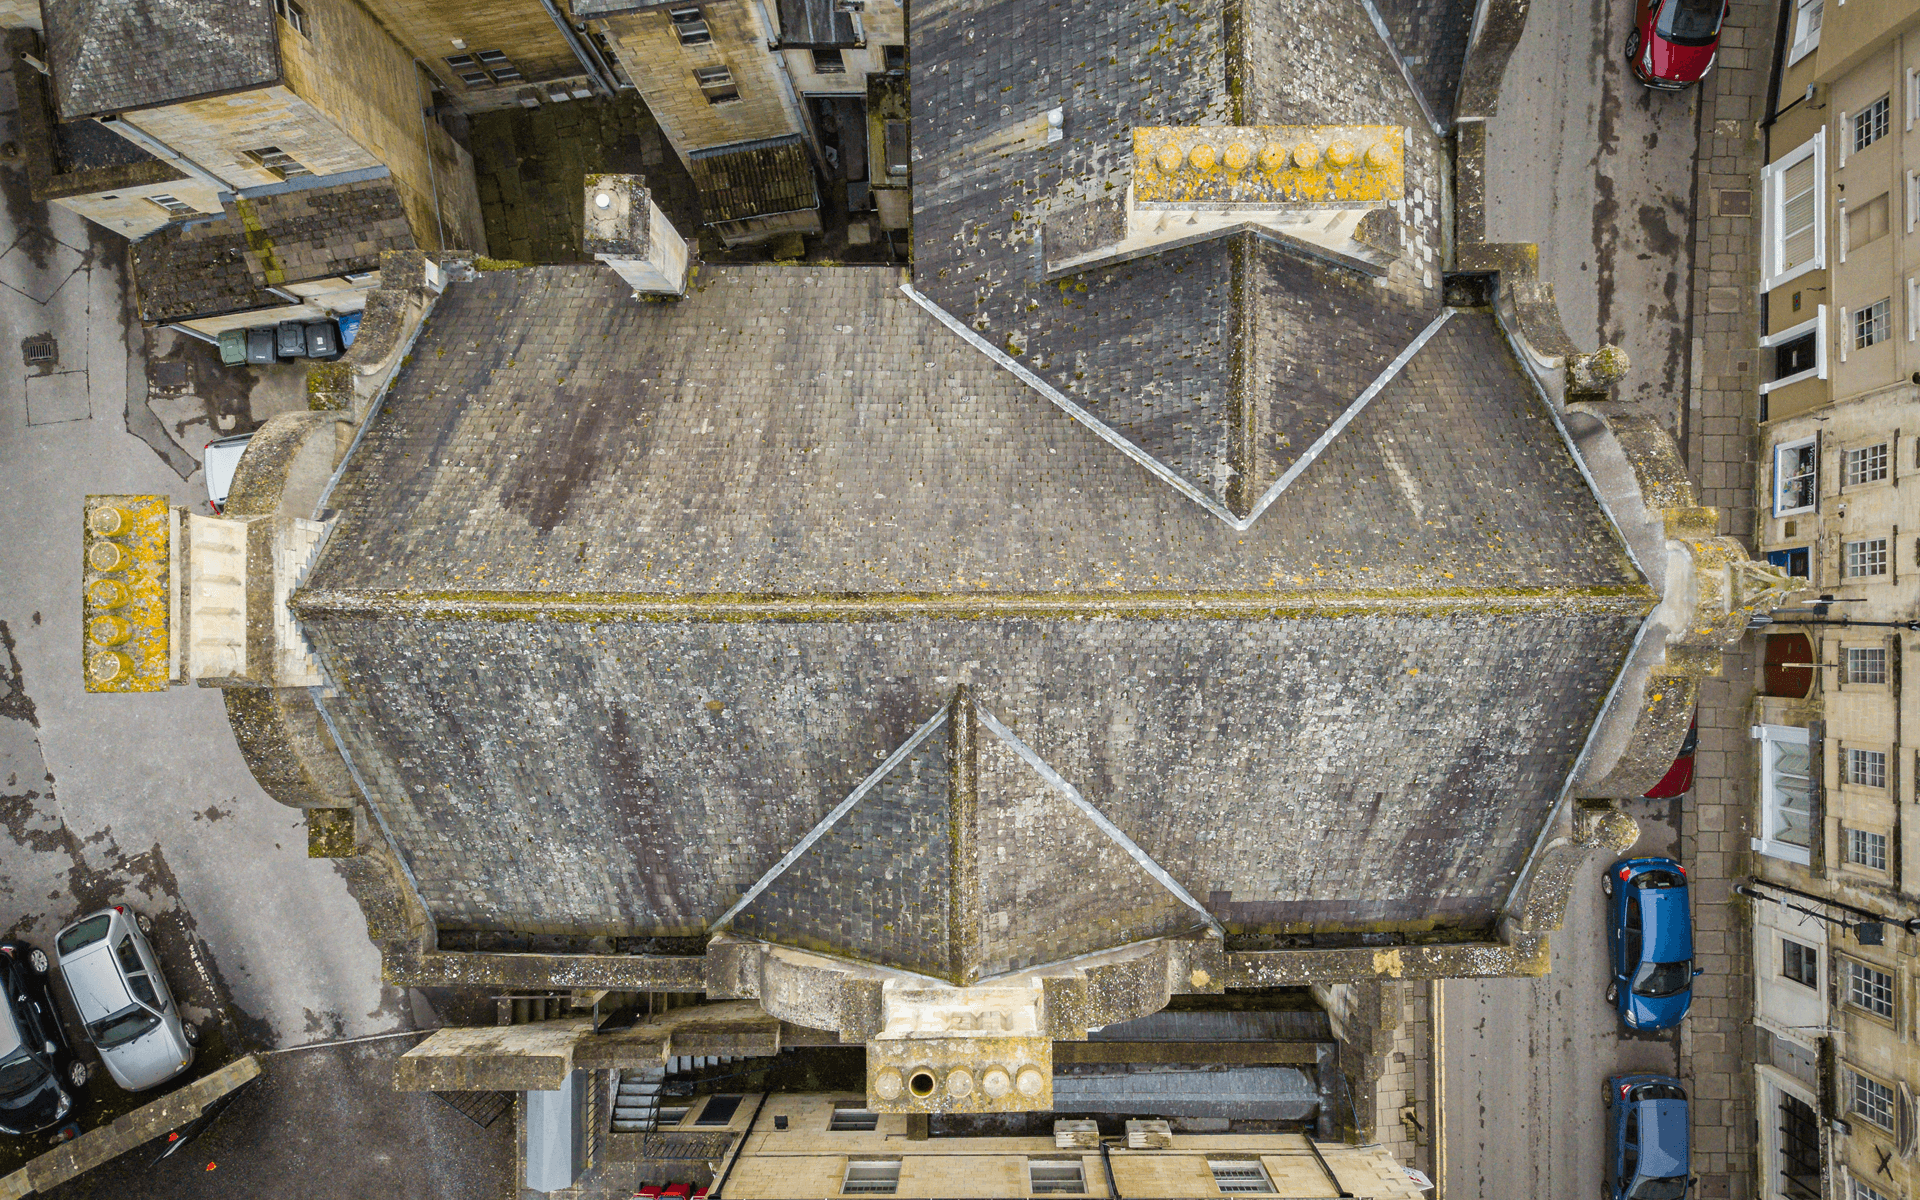 "Mavic 2 Pro" aerial drone photo for a roof survey of a Church in Bradford-on-Avon